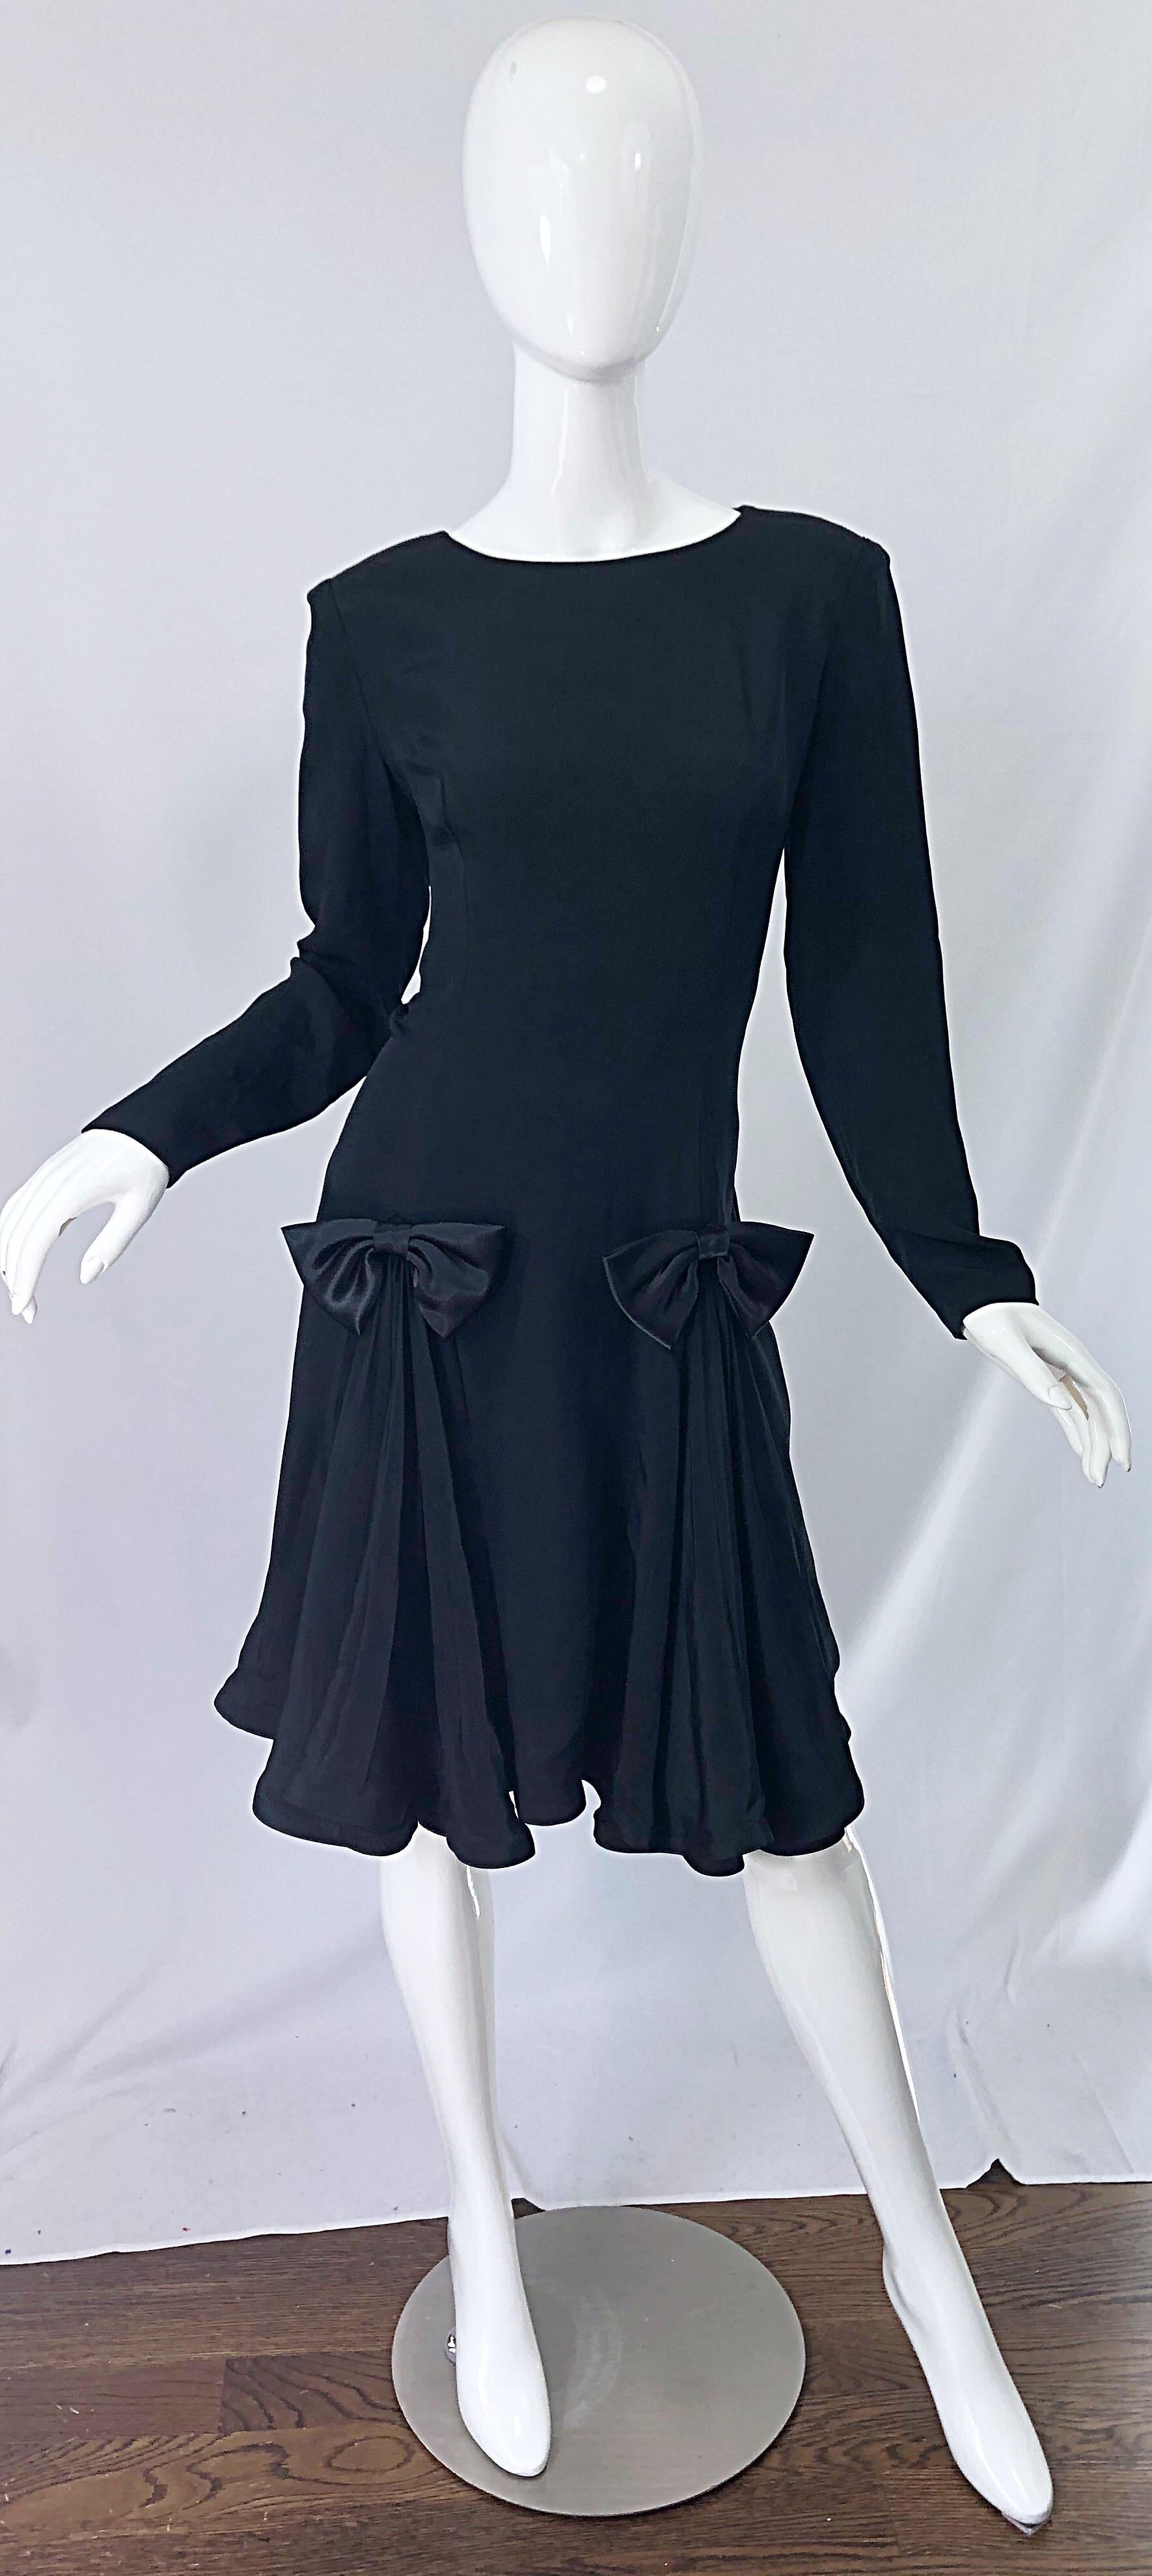 Timeless vintage early 90s PIERRE CARDIN black silk long sleeve bow dress ! Features a tailored bodice with a forgiving full pleated skirt. Hidden zipper up the back with hook-and-eye closure. The perfect little black dress that is great for any